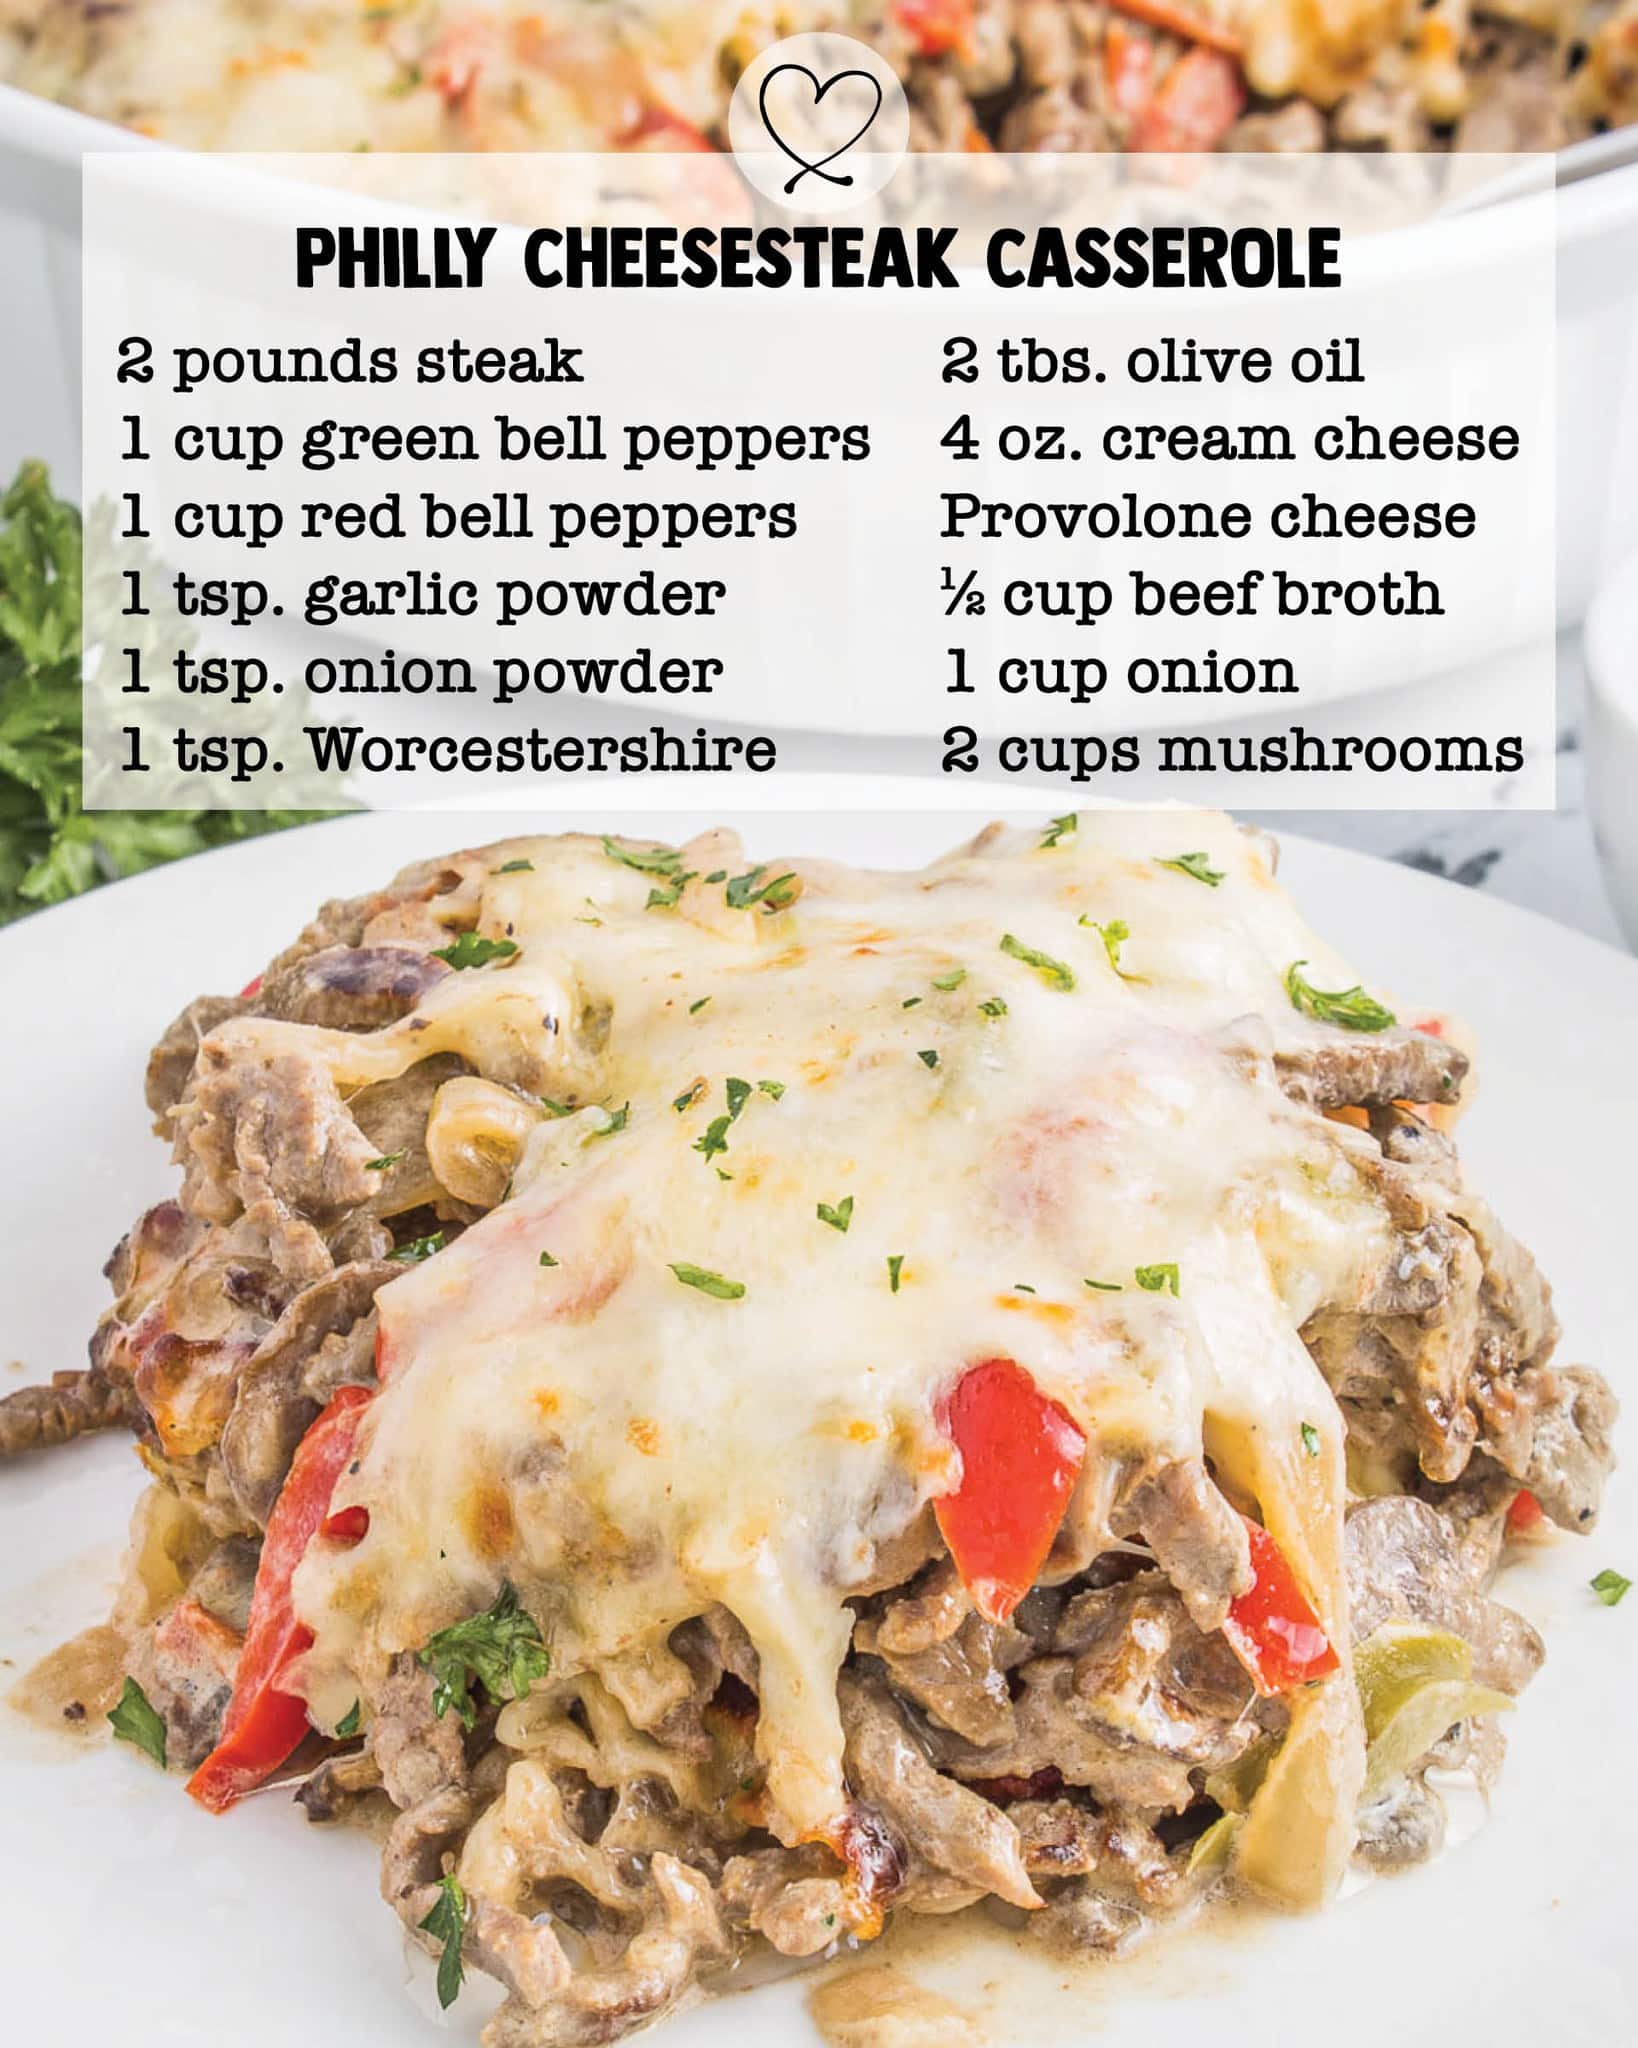 A delicious serving of philly cheesesteak casserole topped with melted cheese, perfect for busy families, surrounded by ingredients list for making the dish, including red bell peppers, olive oil, cream cheese, and